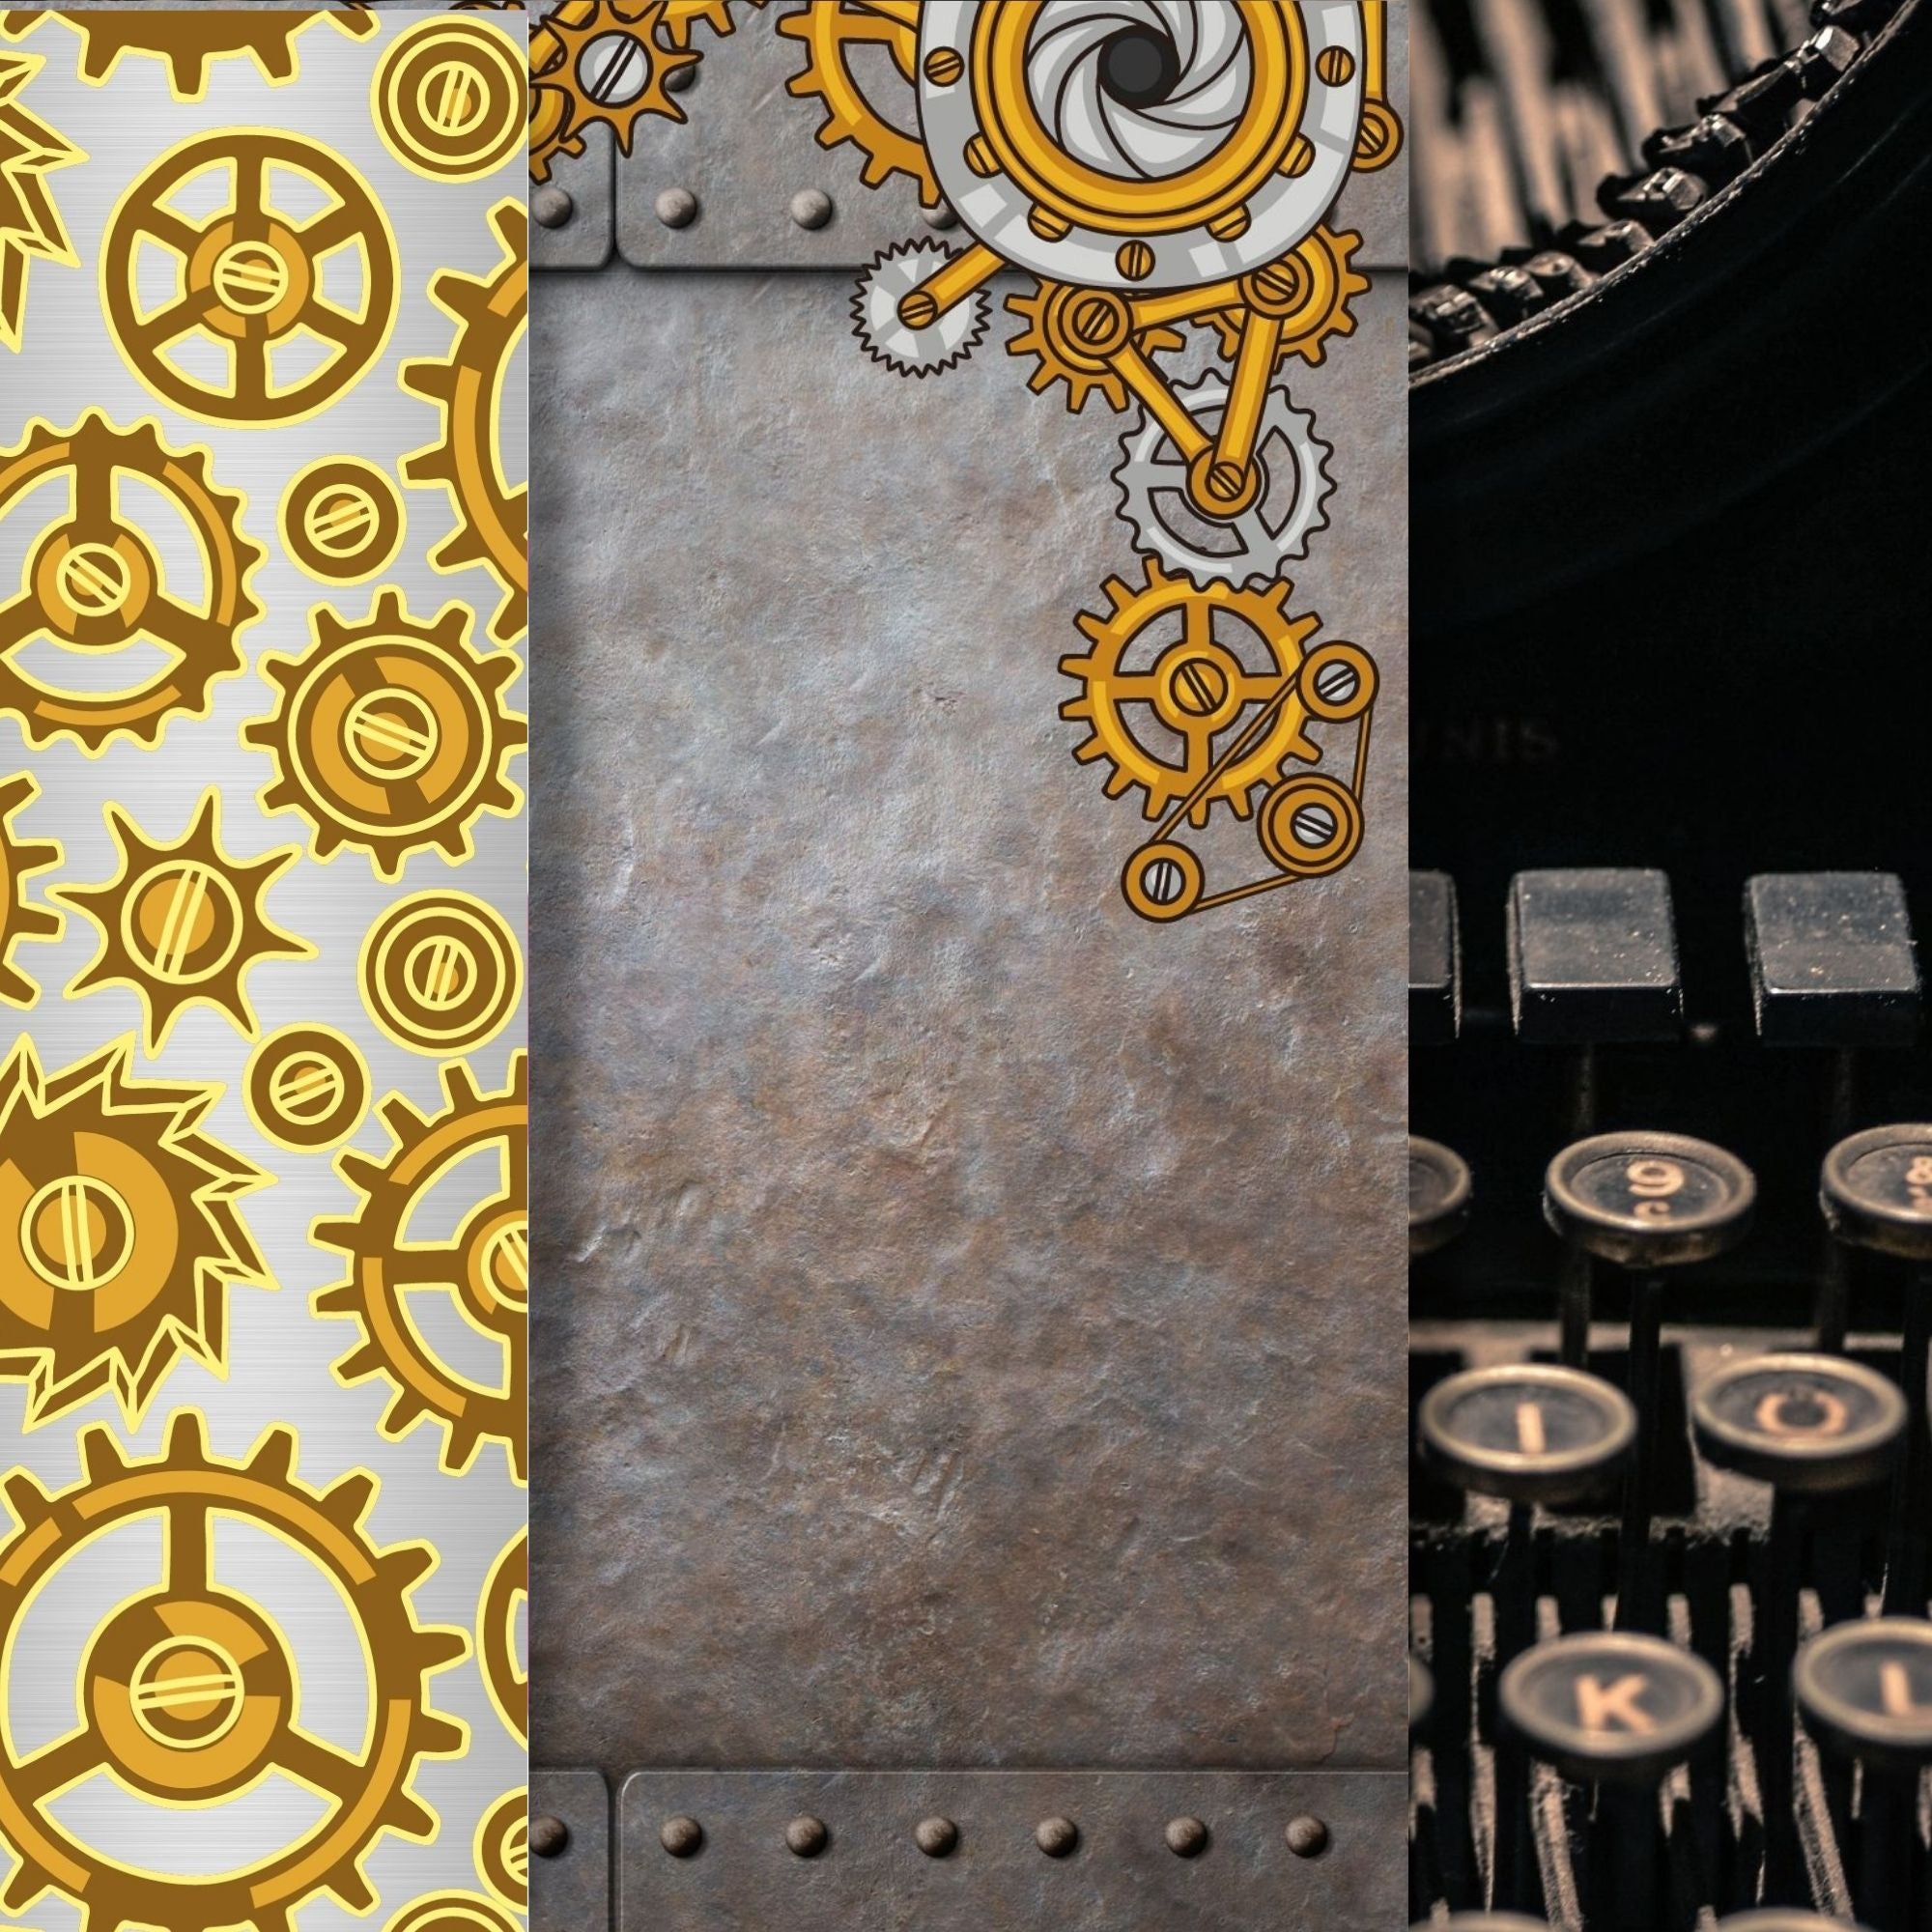 Scrapbookers, this is what you've been looking for! This steampunk themed bundle has 30 unique images that can be printed or used as digital backgrounds.